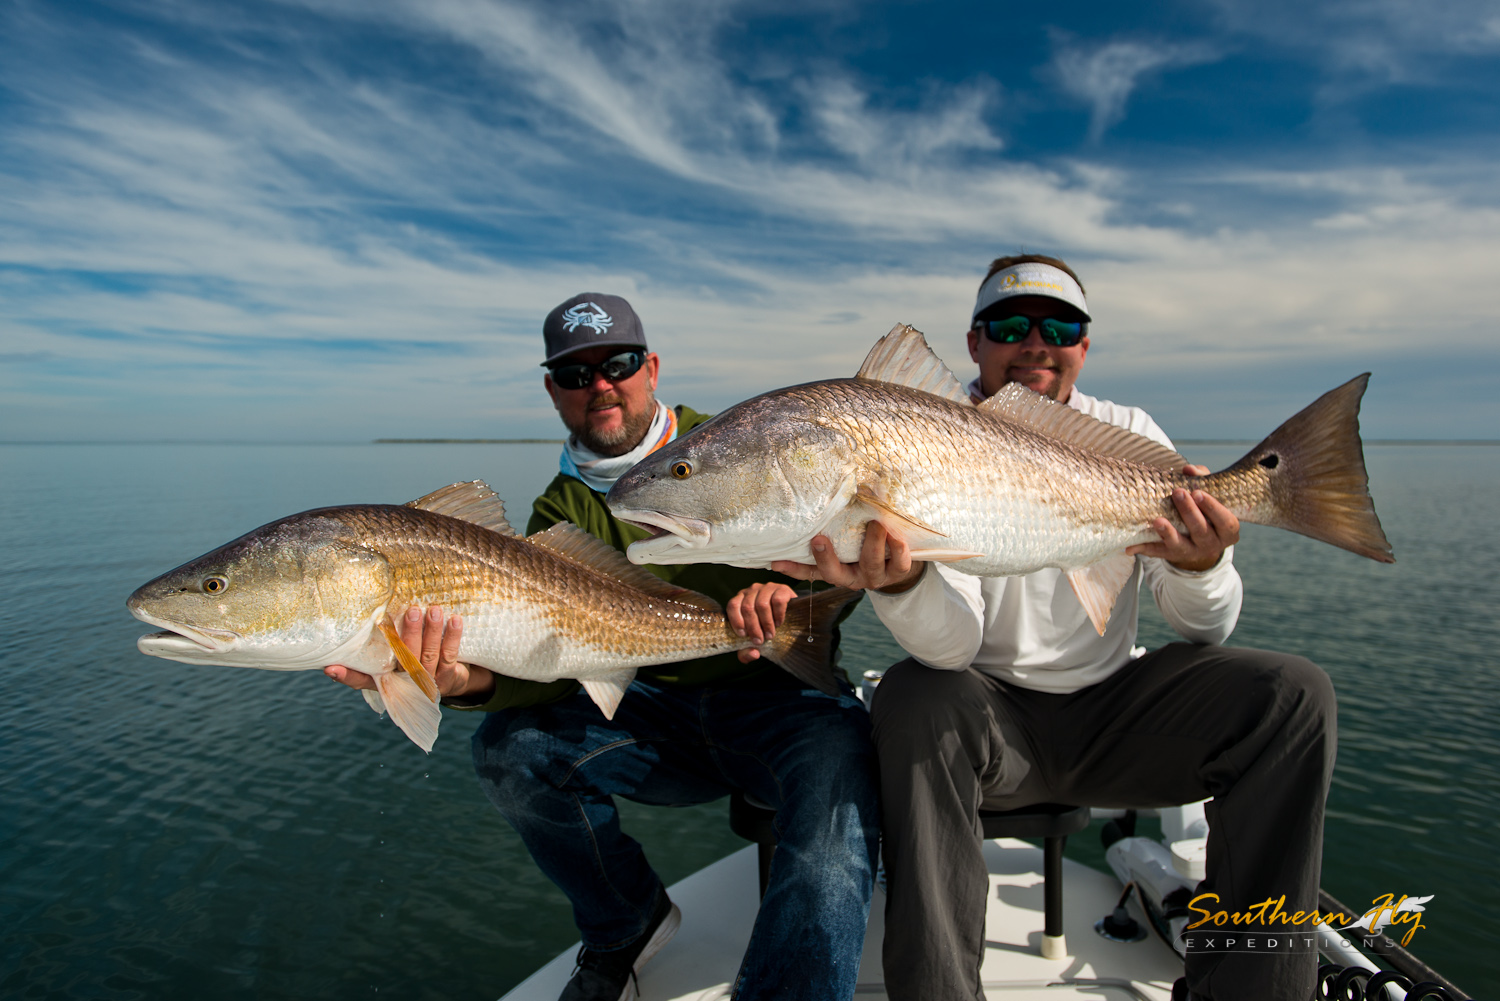 2018-11-19-21_SouthernFlyExpeditions_NewOrleans_JuddJacksonMikeO'Dell-3.jpg